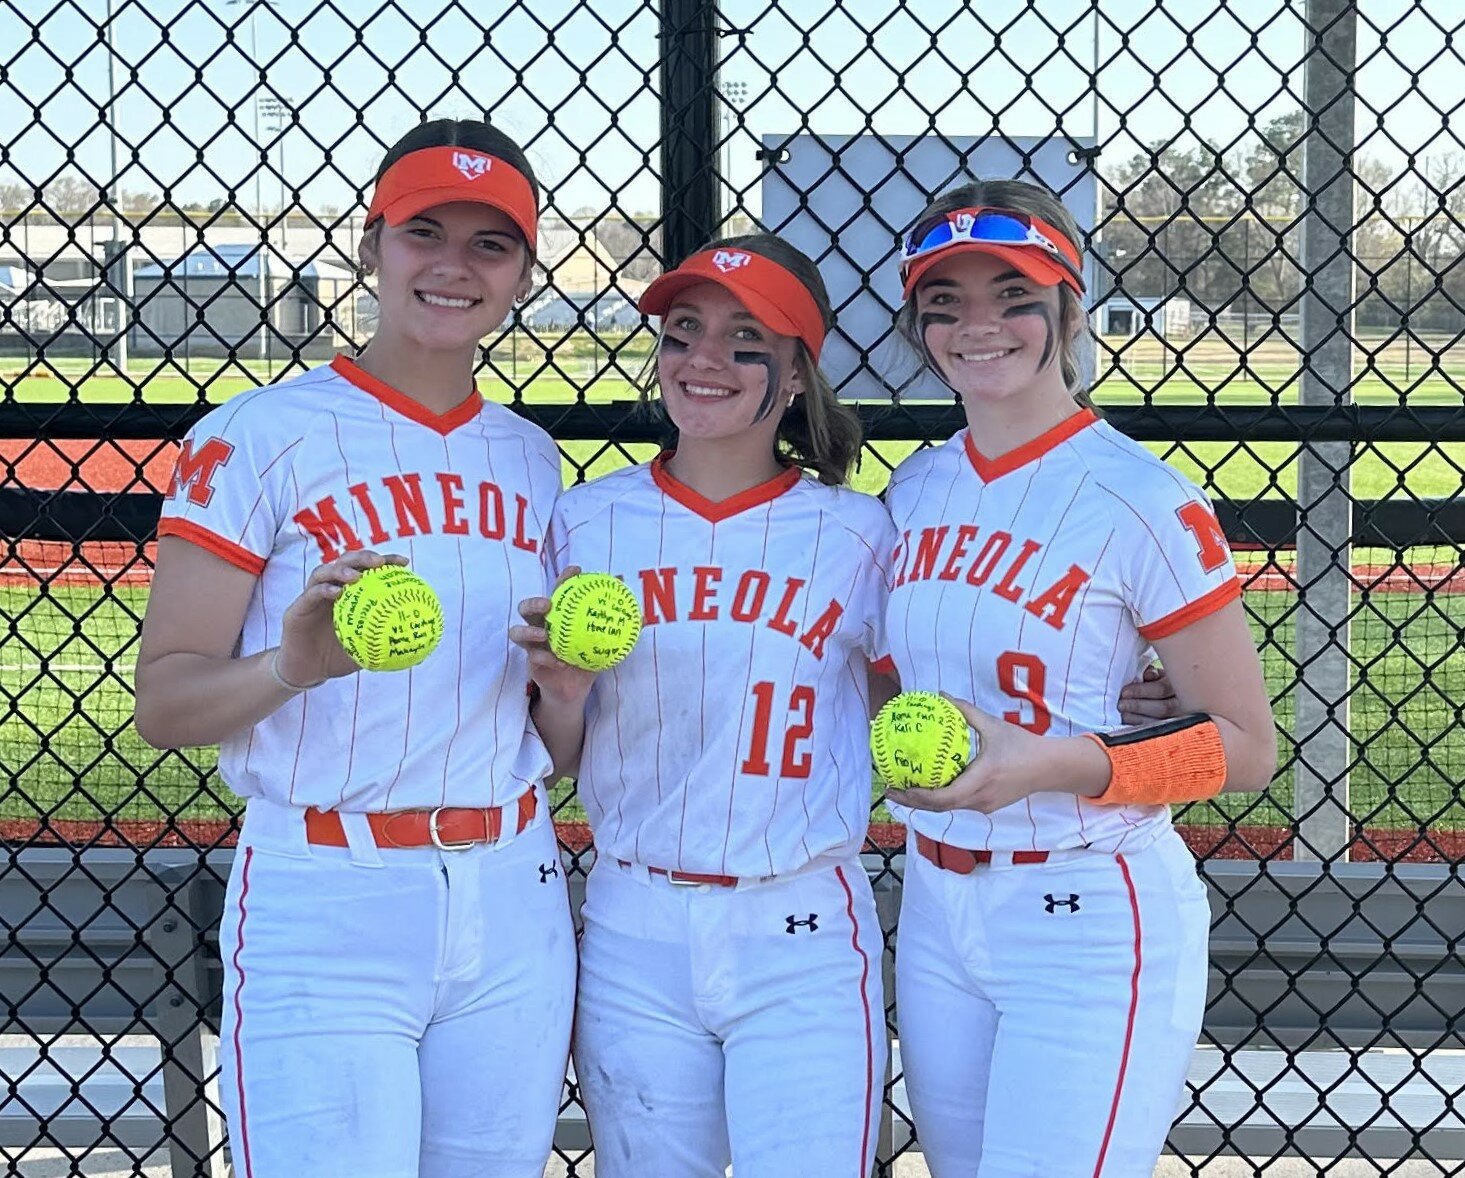 Mineola Lady Jackets, Mahayla McMahon, Kaitlyn McMahon and Kali Chrietzberg, hammered home runs in an 11-0 win against Carthage at the Tyler Legacy Tourney. It was also Jadelyn Marshall’s first career no-hitter. Kaitlyn McMahon was named all tournament. The Lady Jackets also recorded wins over Killeen (10-0) and Tyler High (14- 0) and dropped two games: Troup (4-1) and New Diana (8-6).